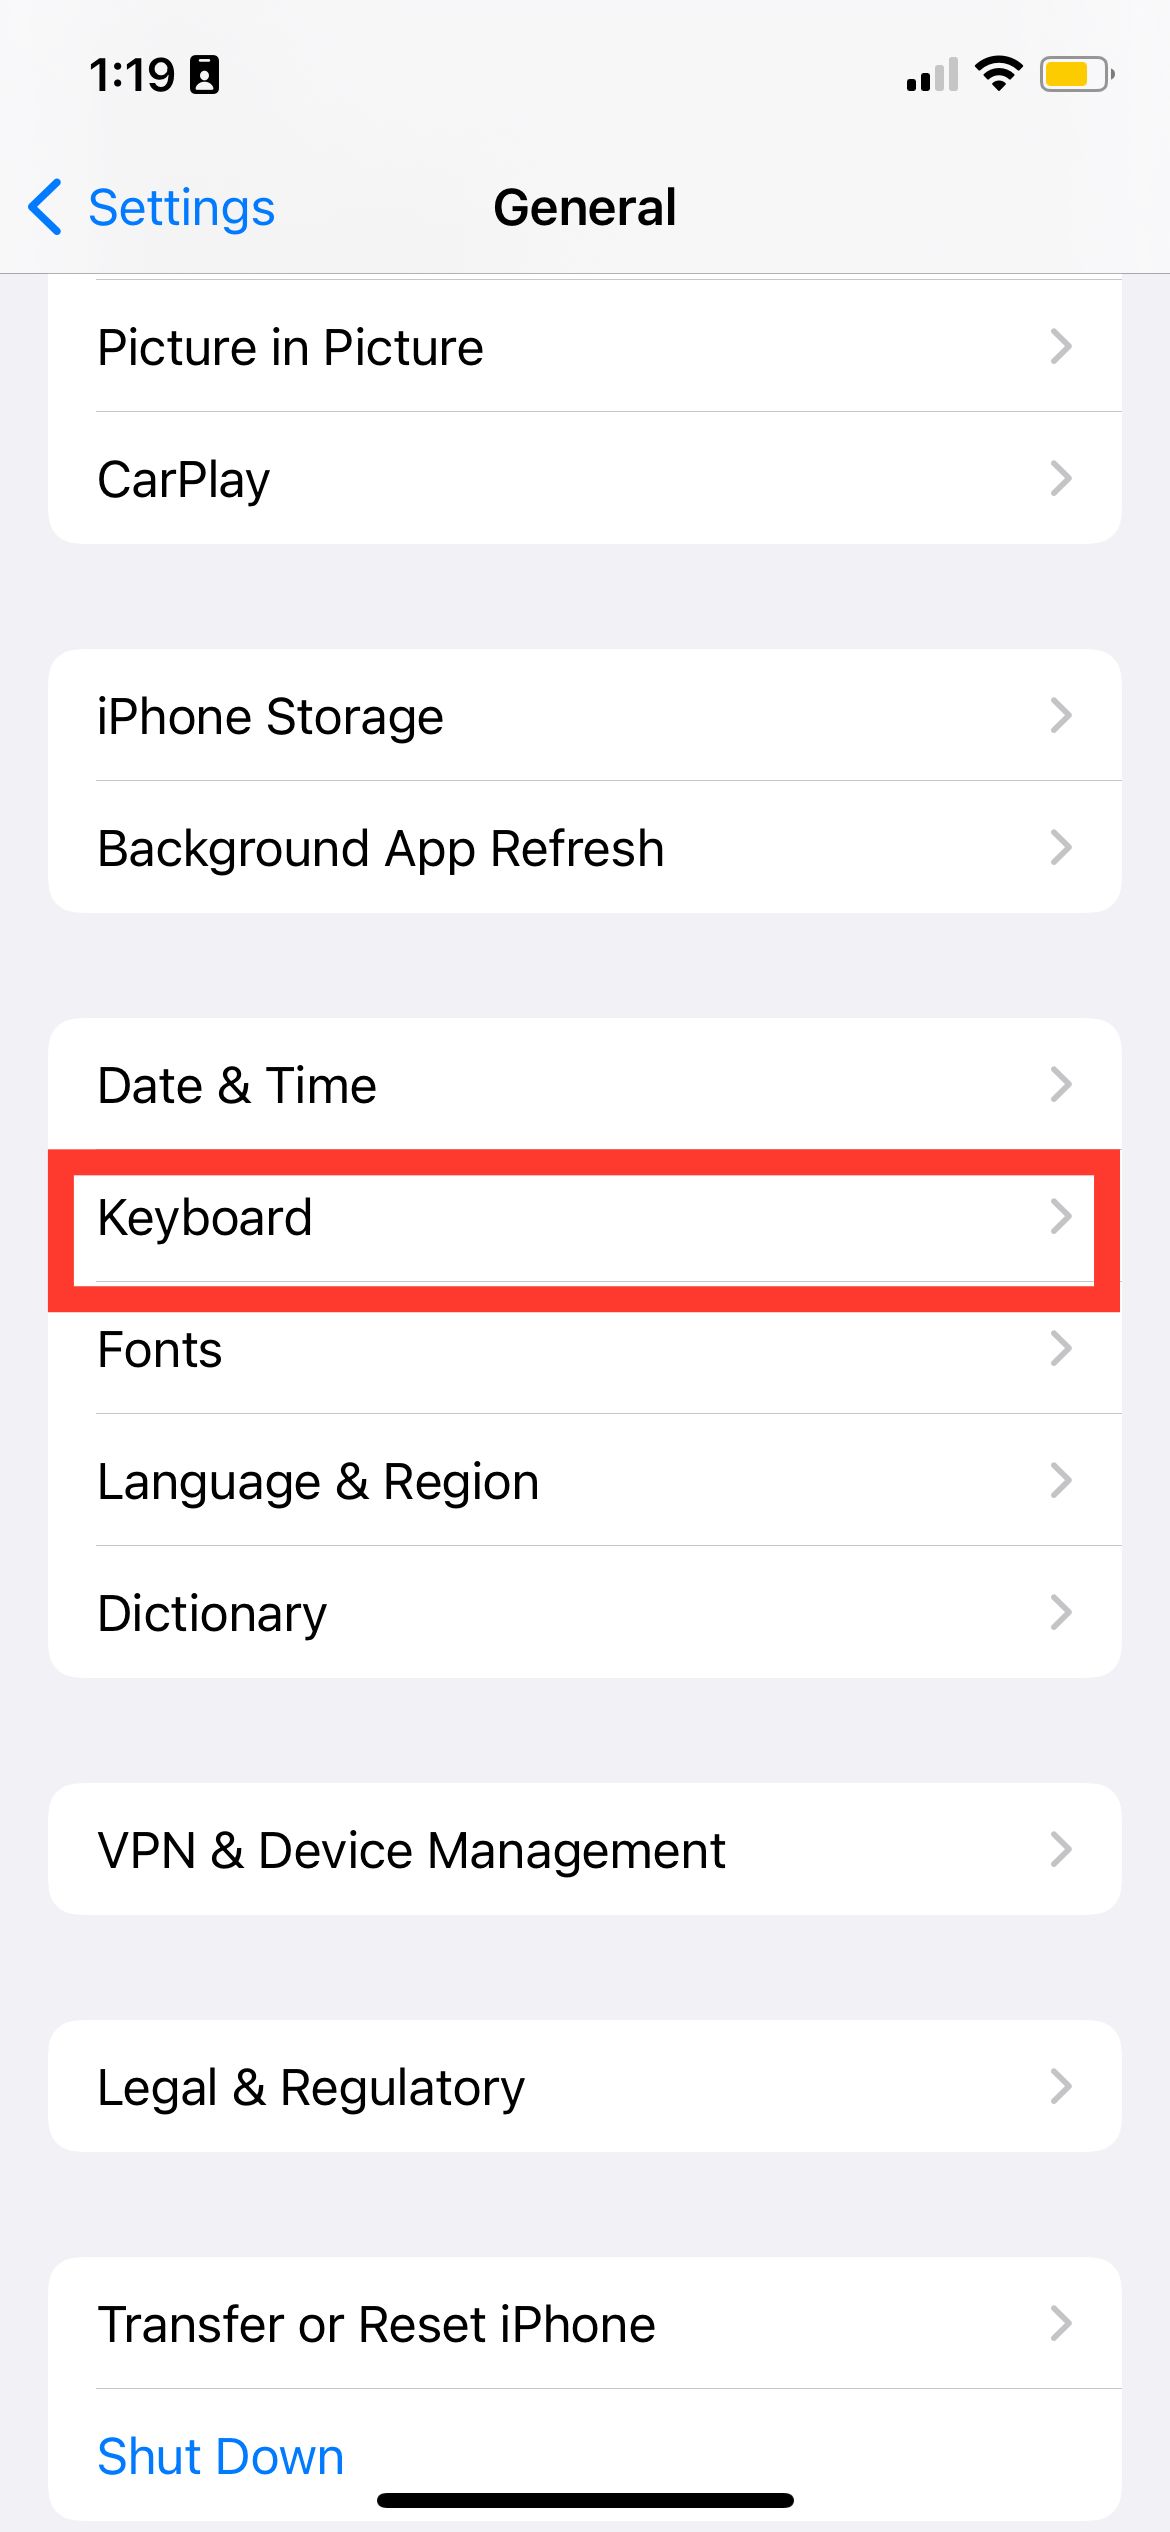 Keyboard from General in iPhone